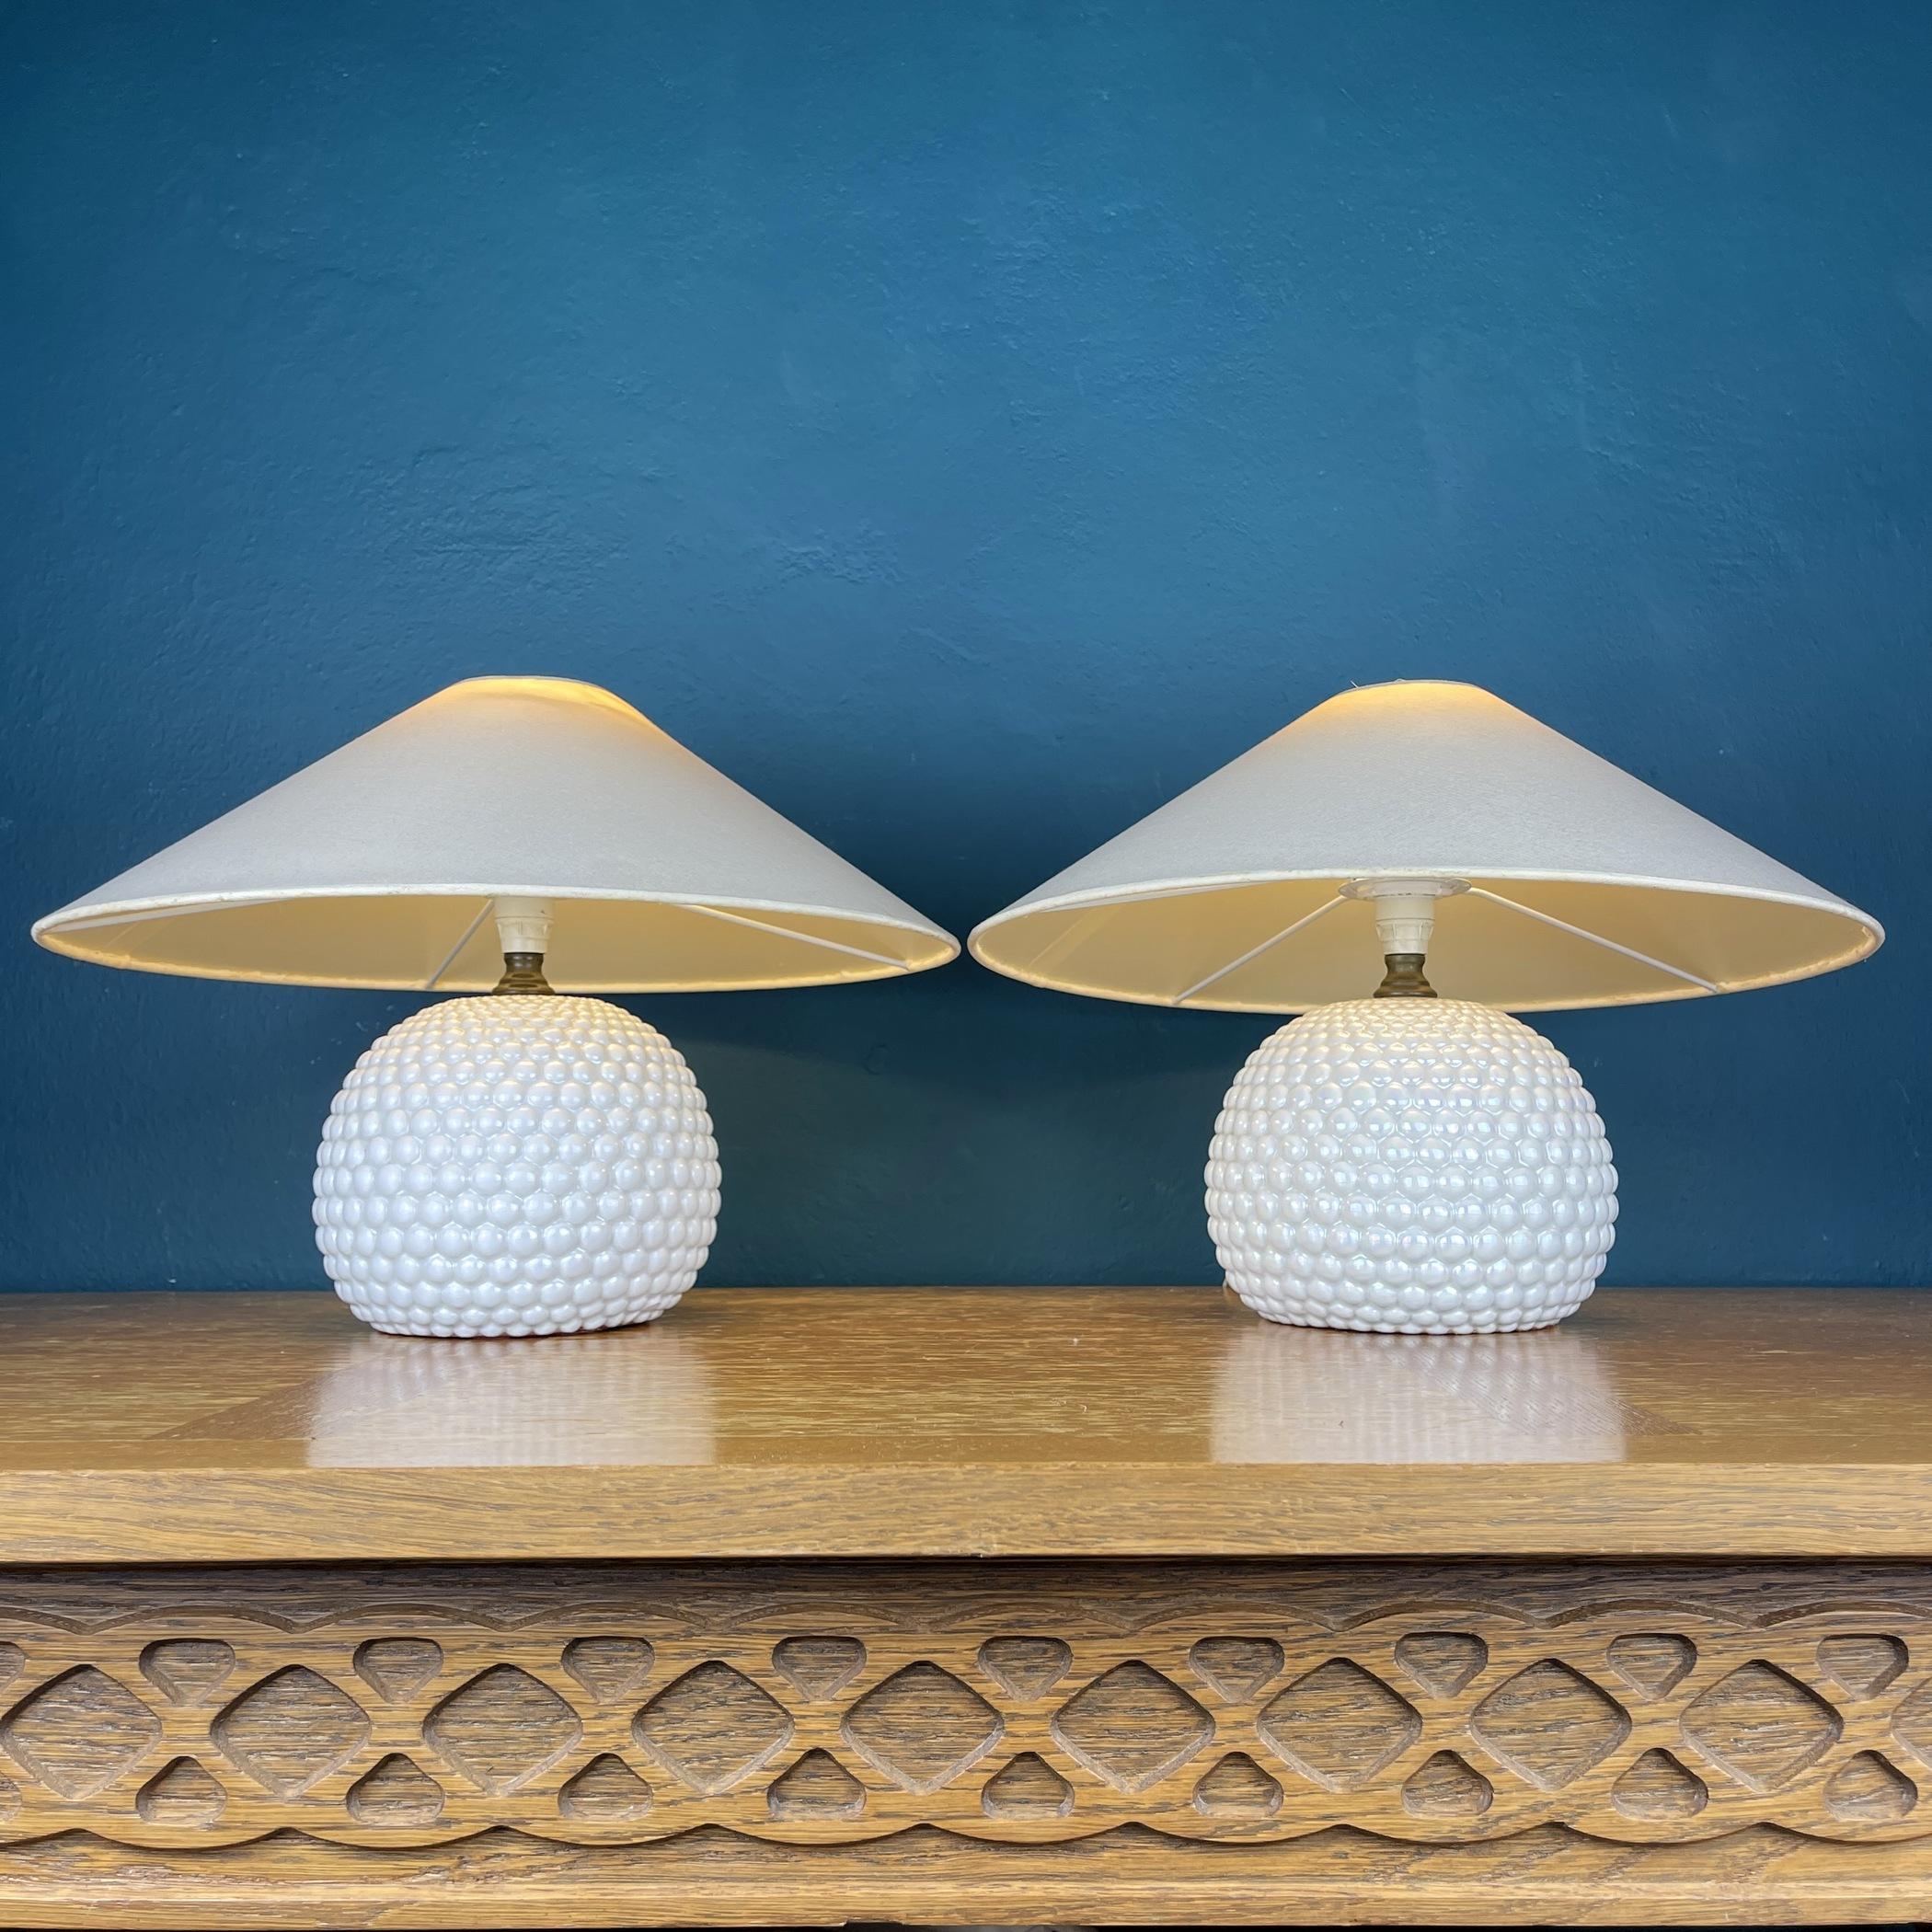 The pair of beautiful mother-of-pearl retro lamps were made in Italy in the 1970s. The lamp has the author's logo. Soft light will create comfort in your bedroom, nursery or living room. Very good vintage condition. Fully working. E14 bulb required.